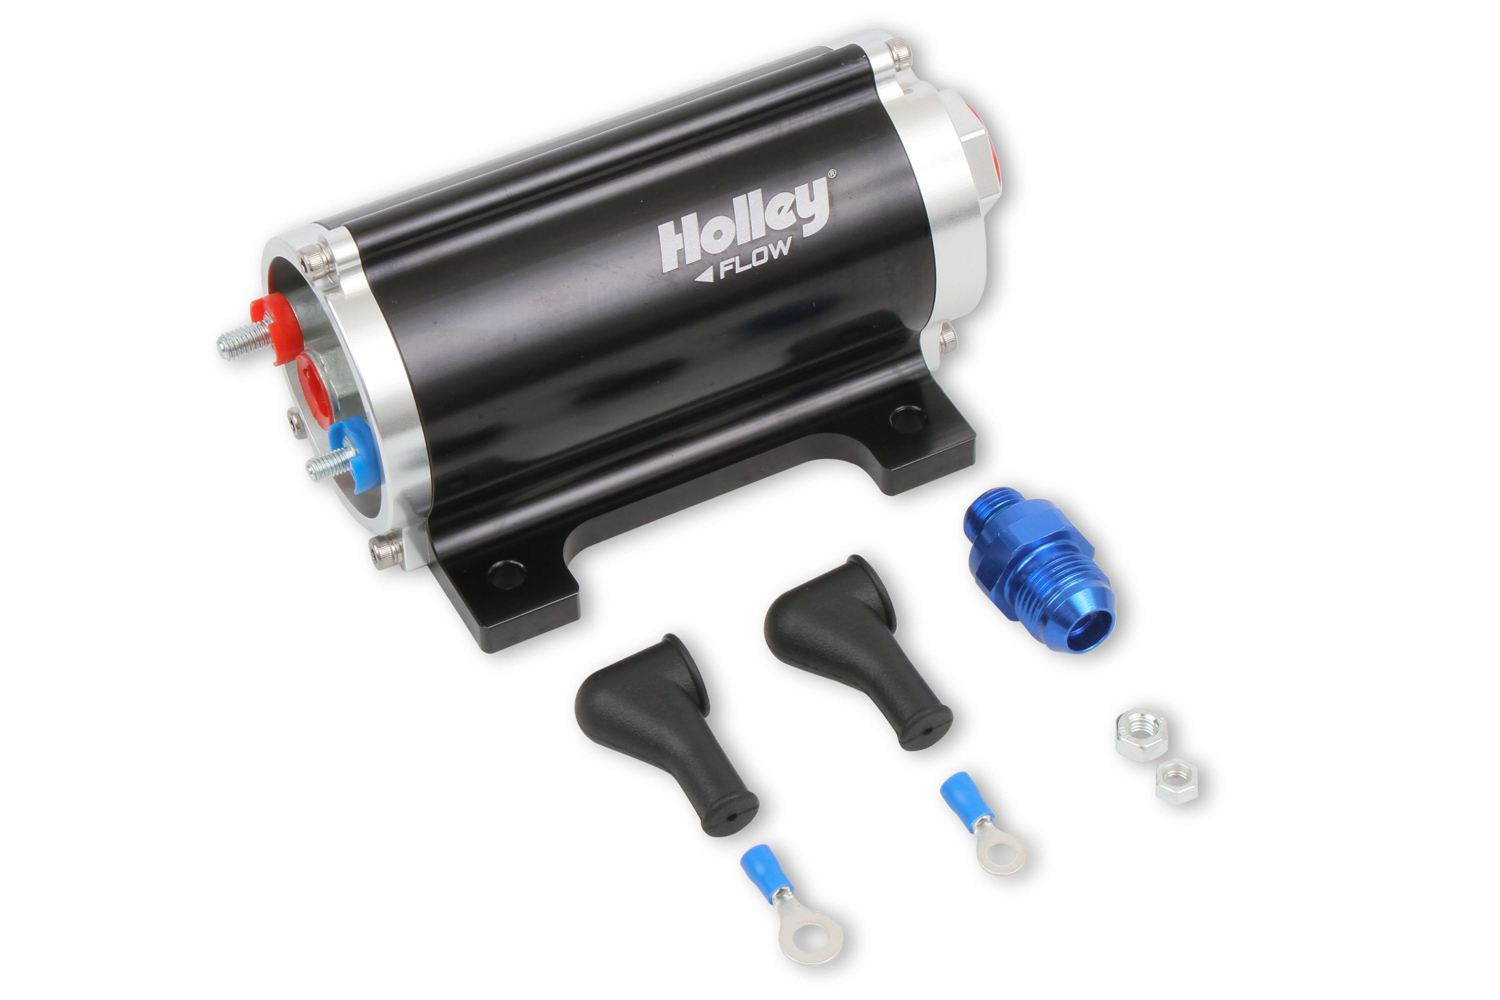 Fuel Pump - Electric - In-Line - 100 gph at 8 psi - 8 AN O-Ring Female Inlet - 6 AN O-Ring Female Outlet - Bracket Included - Aluminum - Black Anodized - E85 / Diesel / Gas - Each